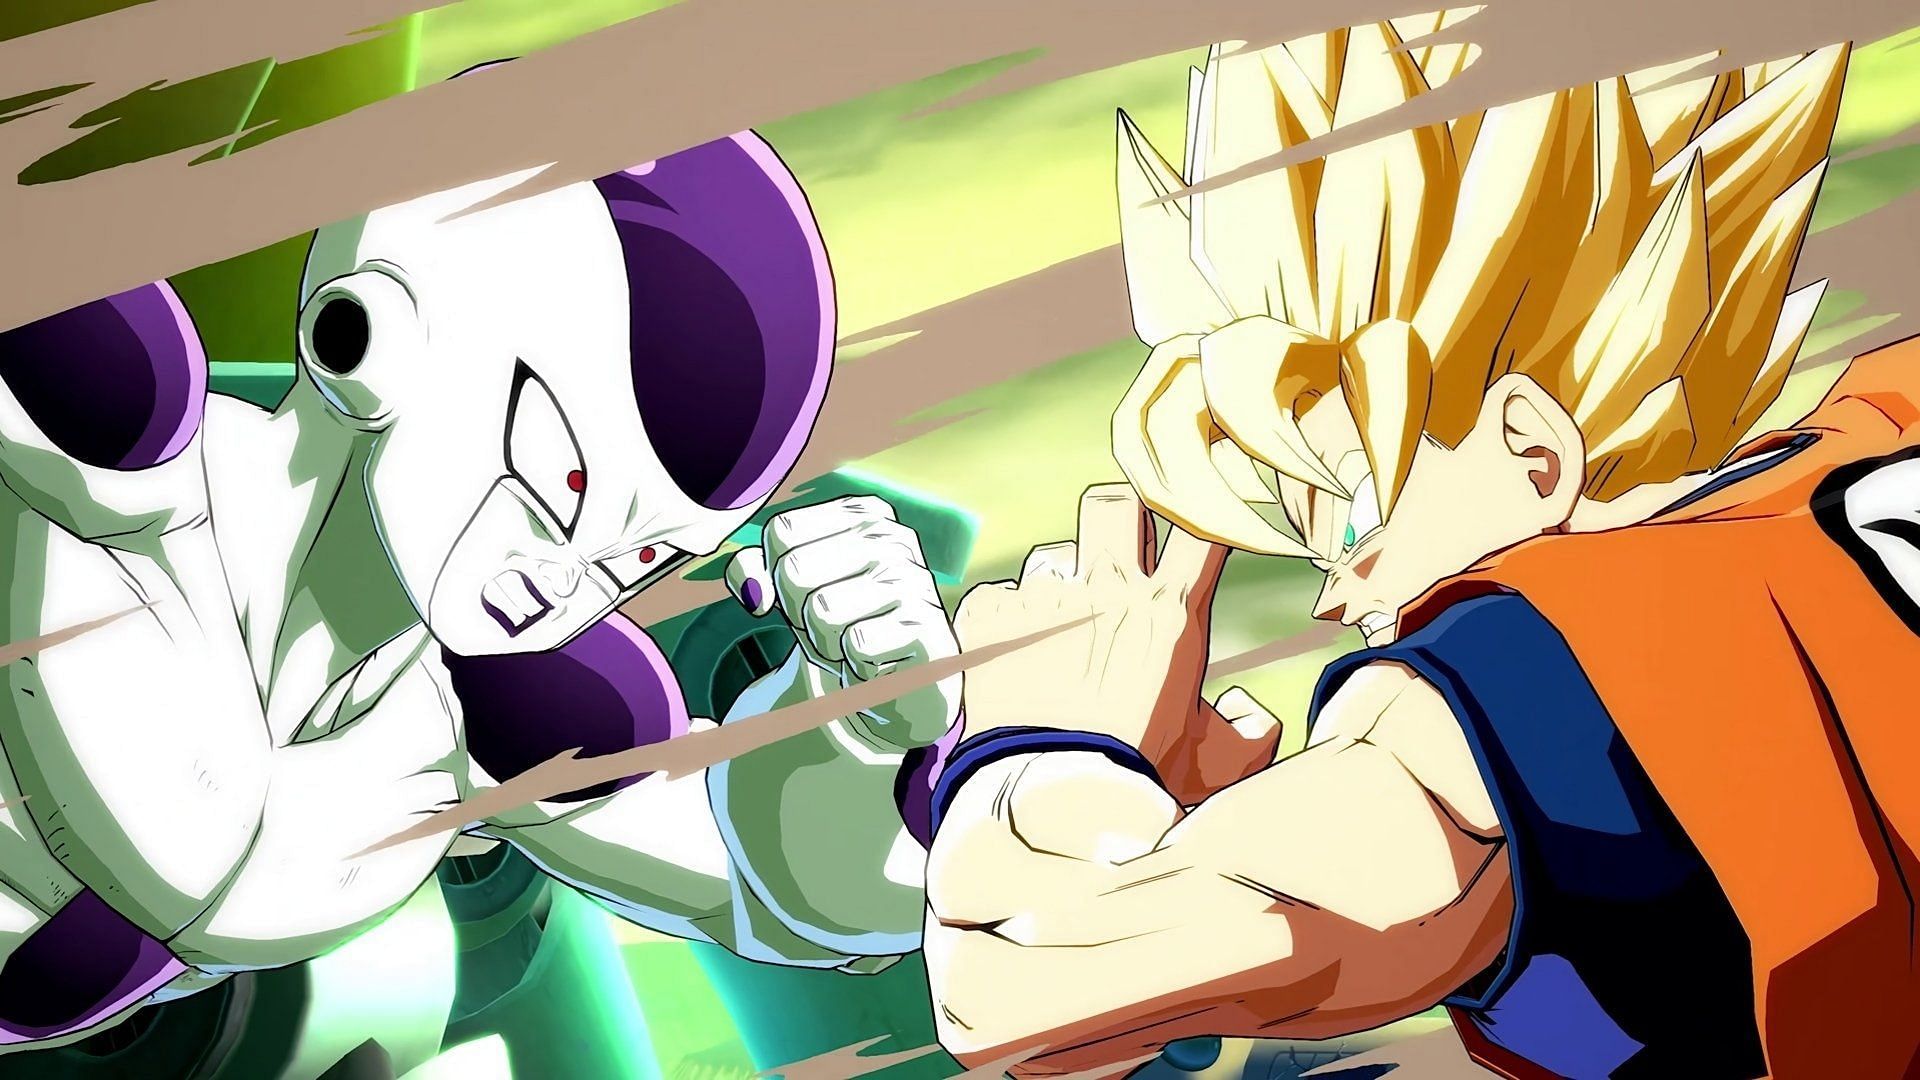 Frieza goes up against Goku in the series (Image via Toei Animation)